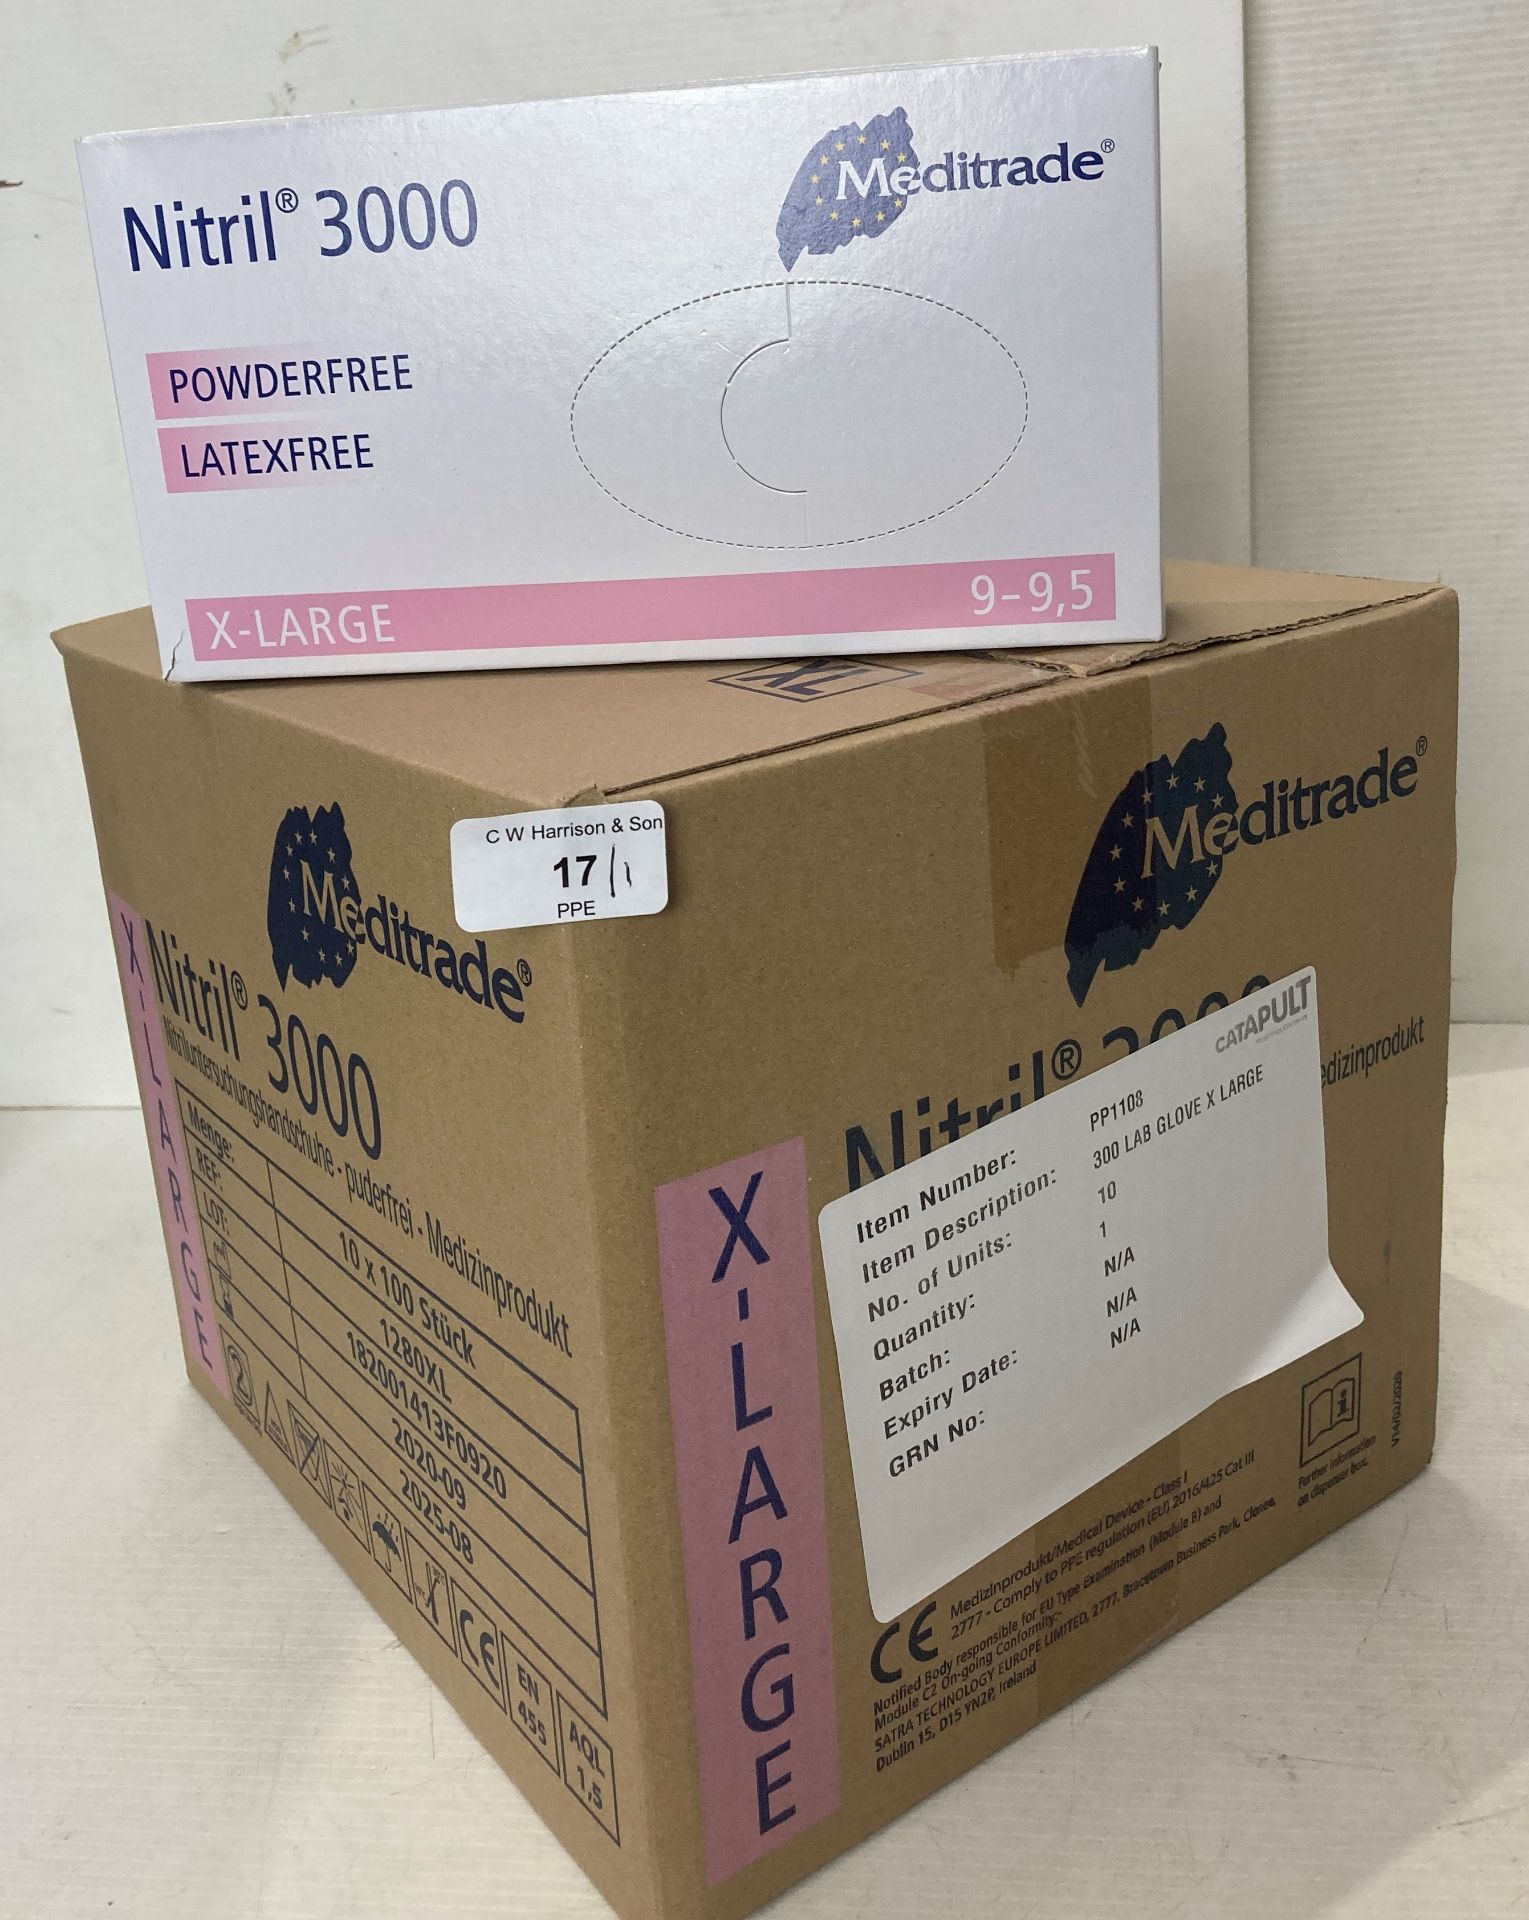 10 boxes of (1 outer box) Meditrade Nitrile 3000 LAB gloves - size XL